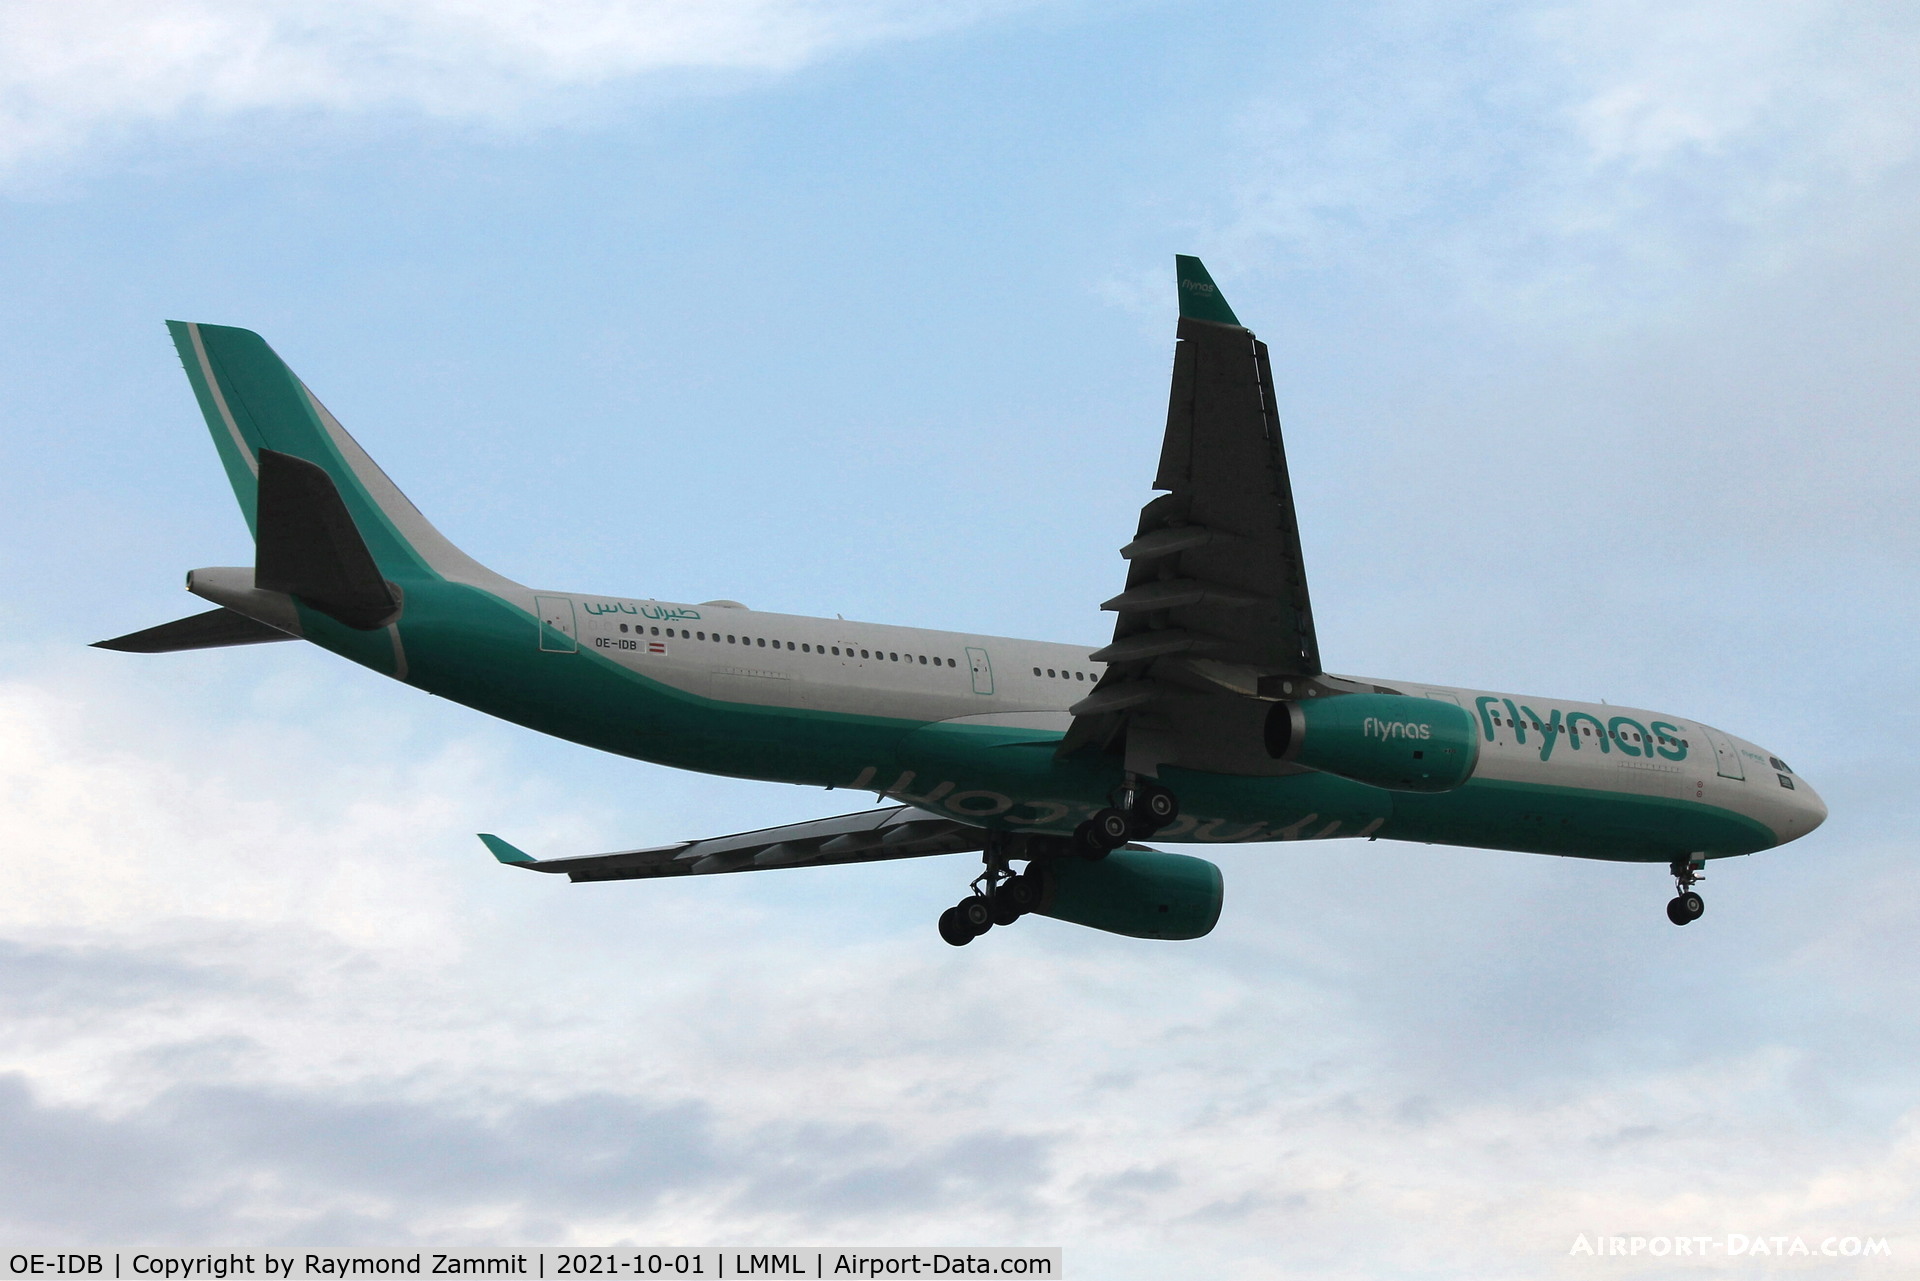 OE-IDB, Airbus A330-300 C/N 1607, A330 OE-IDB of Flynas seen here landing in Malta RW13. The aircraft will be re-registerered as HZ-NE24.